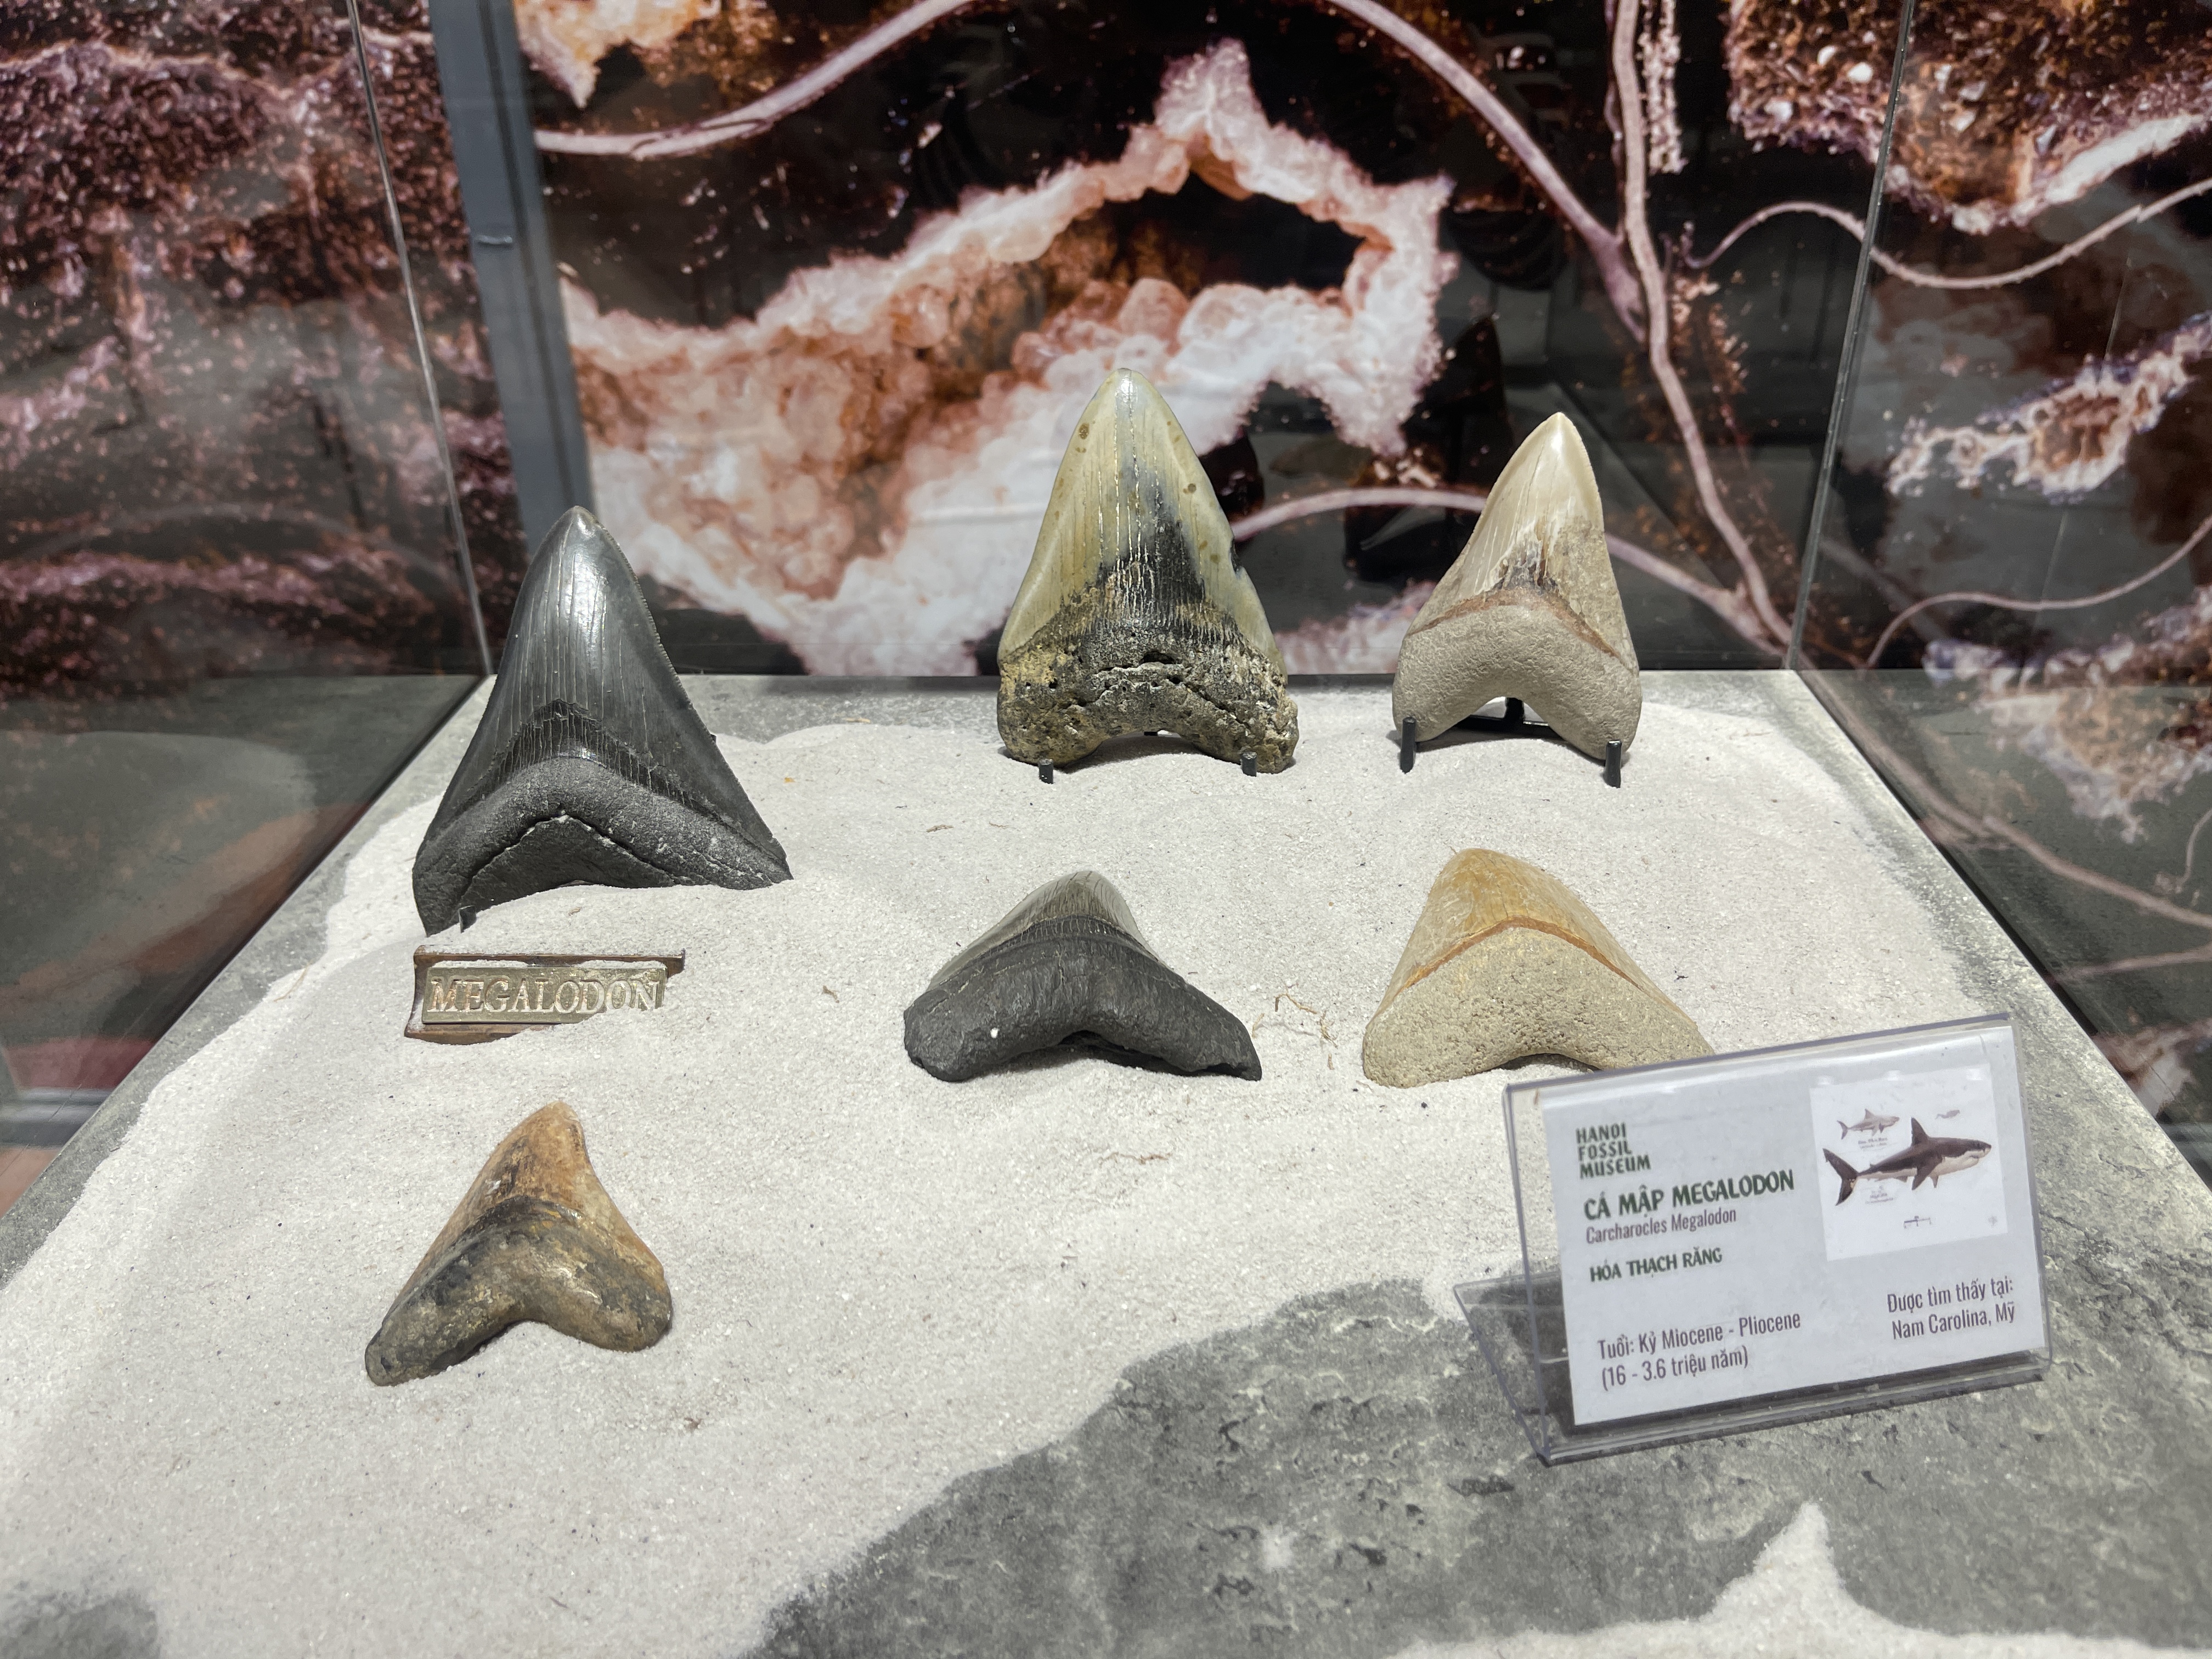 Travel back in time to see earth evolution at this fossil exhibition in central Vietnam